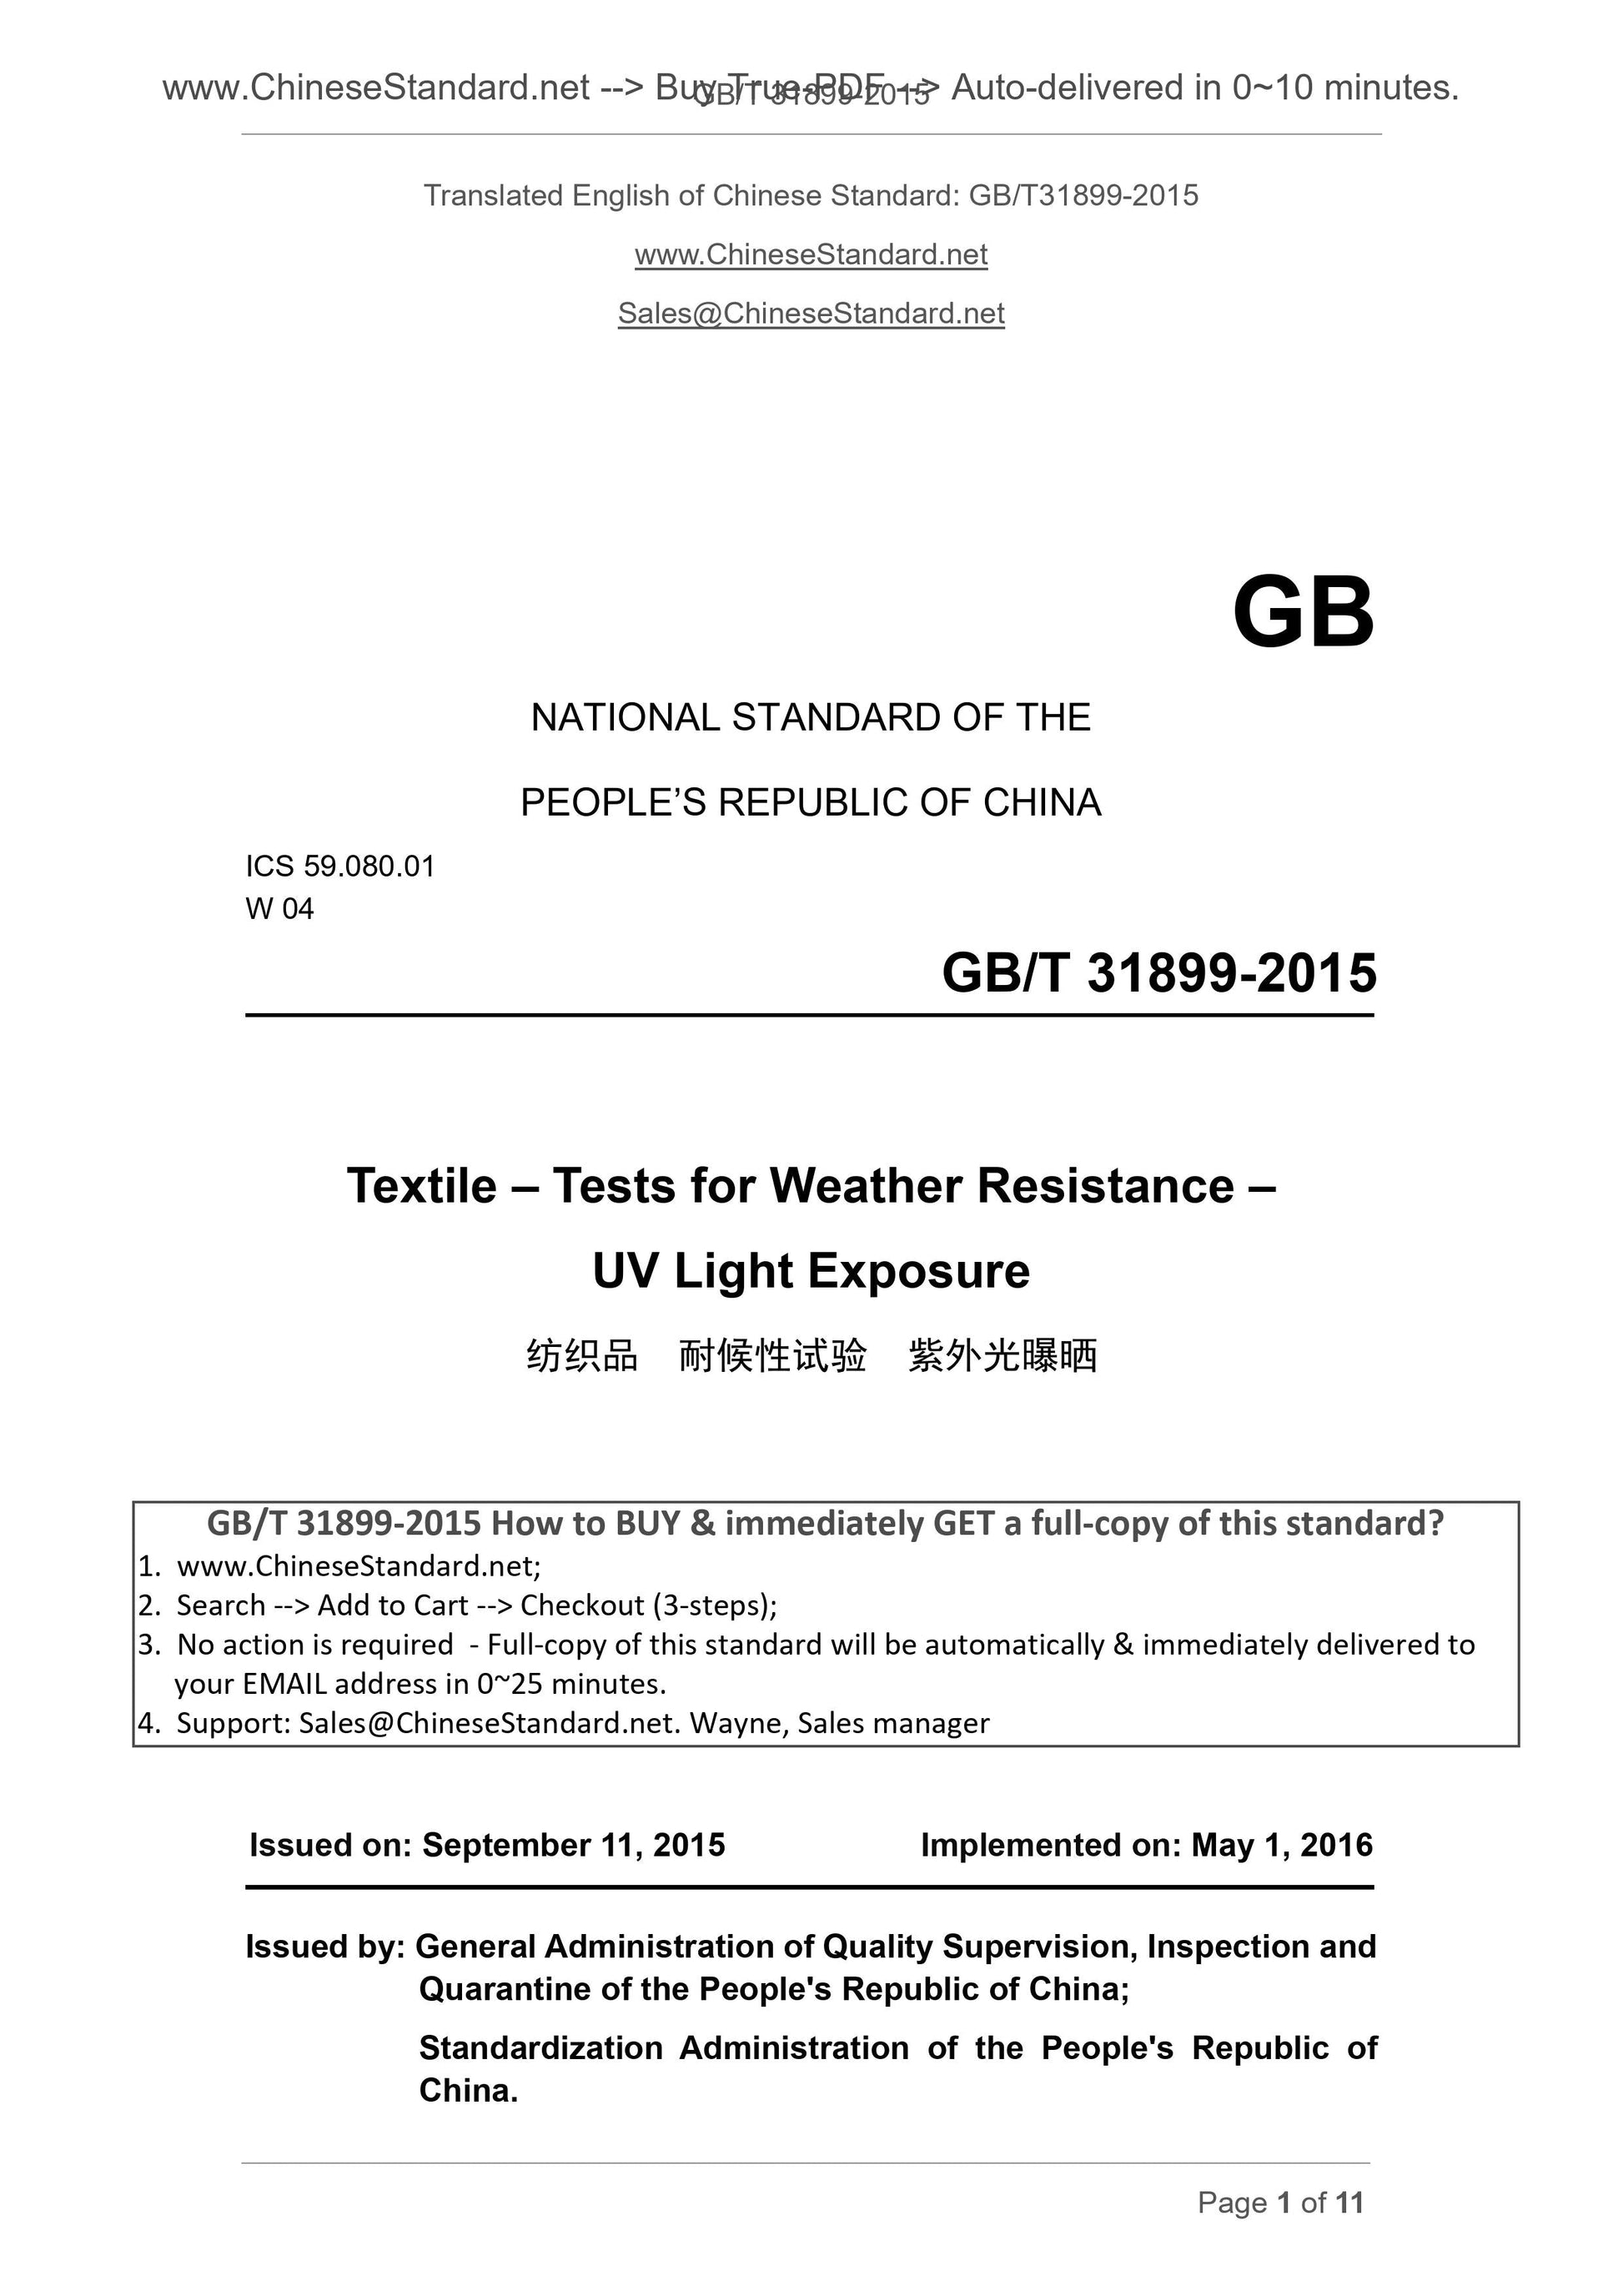 GB/T 31899-2015 Page 1